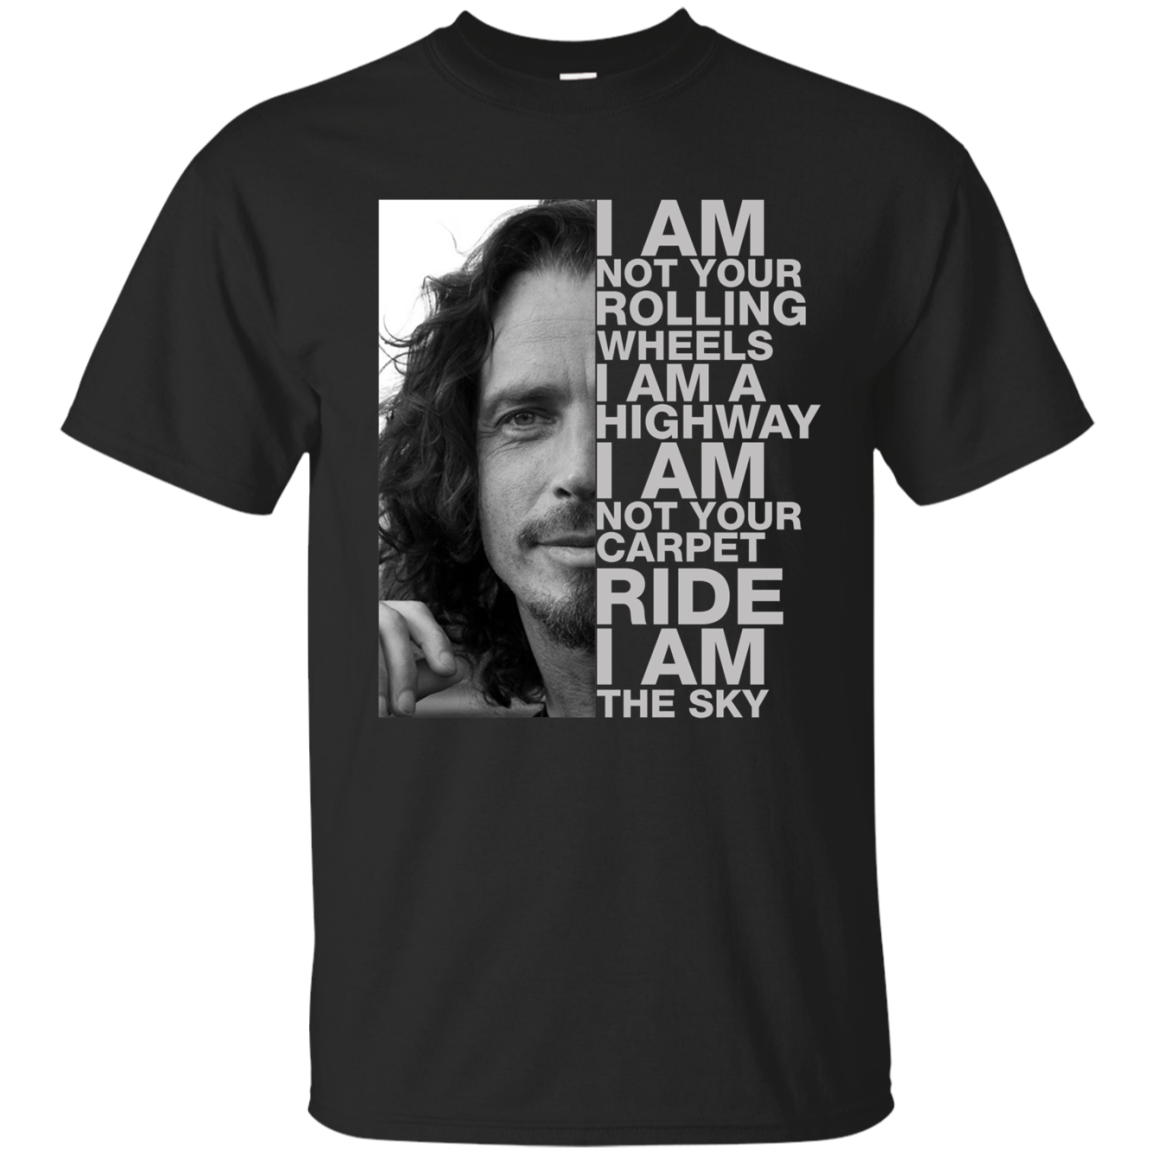 Chris Cornel: I am not your rolling wheels I am the highway shirt, tank top